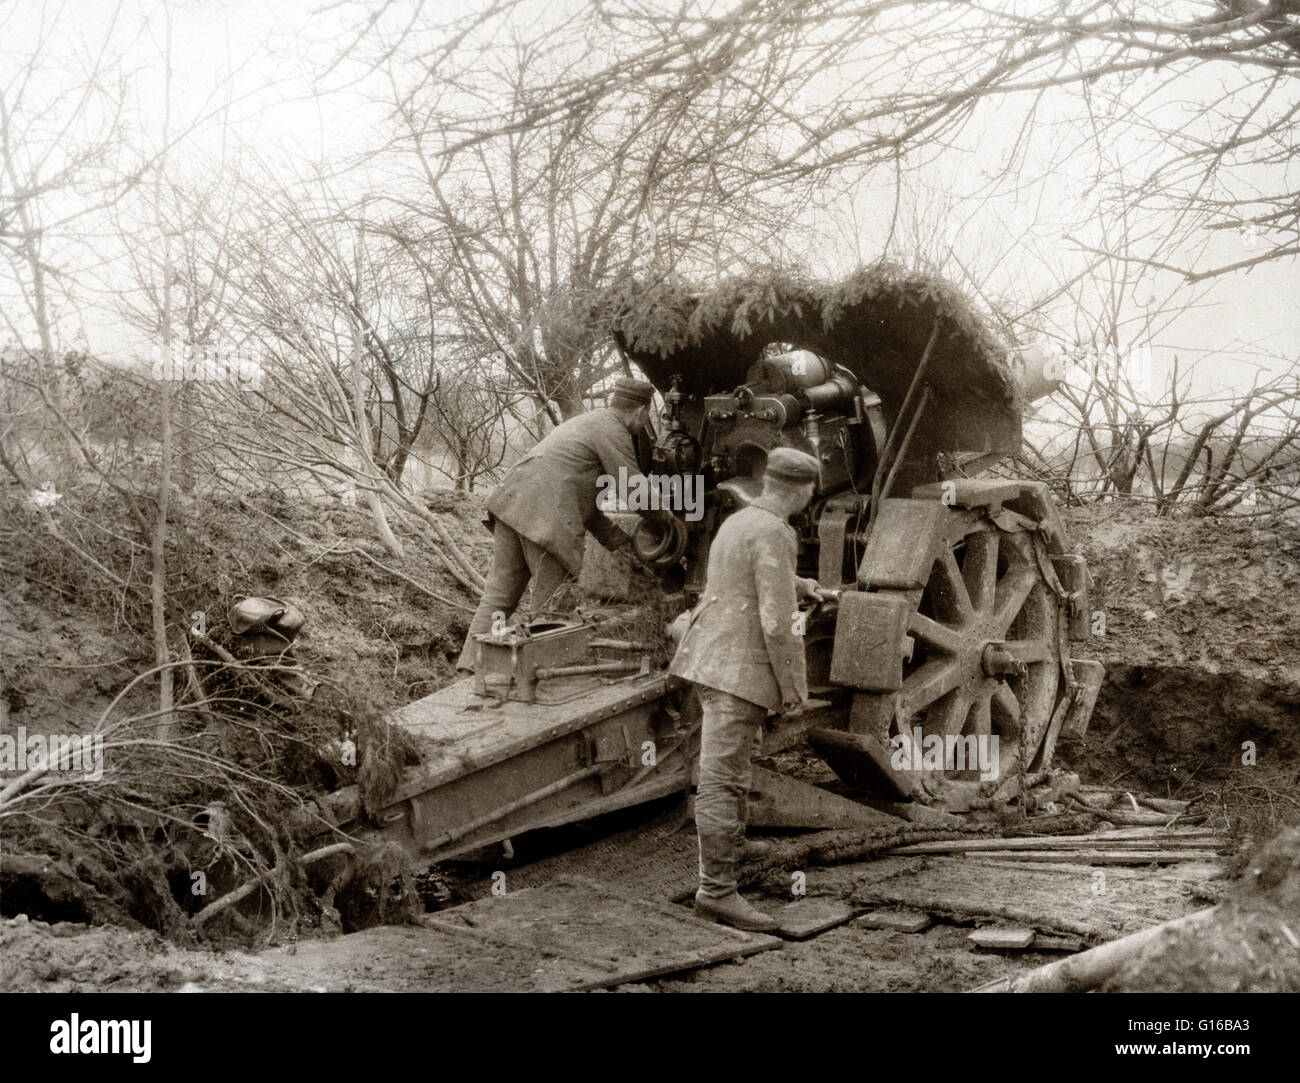 Soldiers at howitzer camouflaged with evergreen branches. The early 20th century saw the introduction of super-heavy siege howitzers. They were transported mechanically rather than by teams of horses and had to be assembled on their firing position. The o Stock Photo